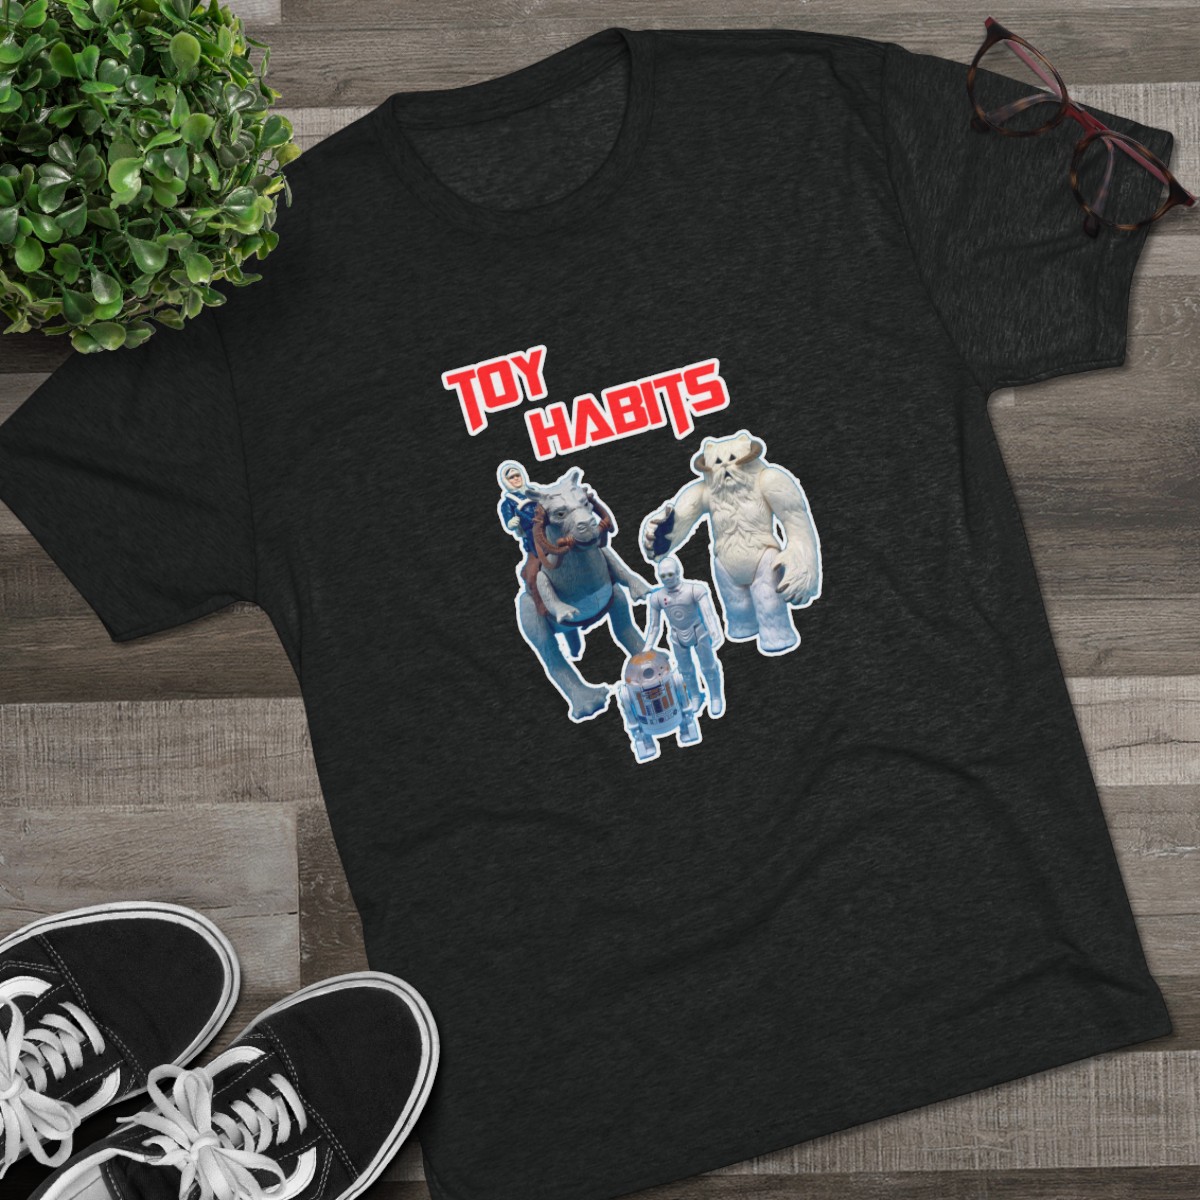 Hoth Unisex Tri-Blend Crew Tee product thumbnail image